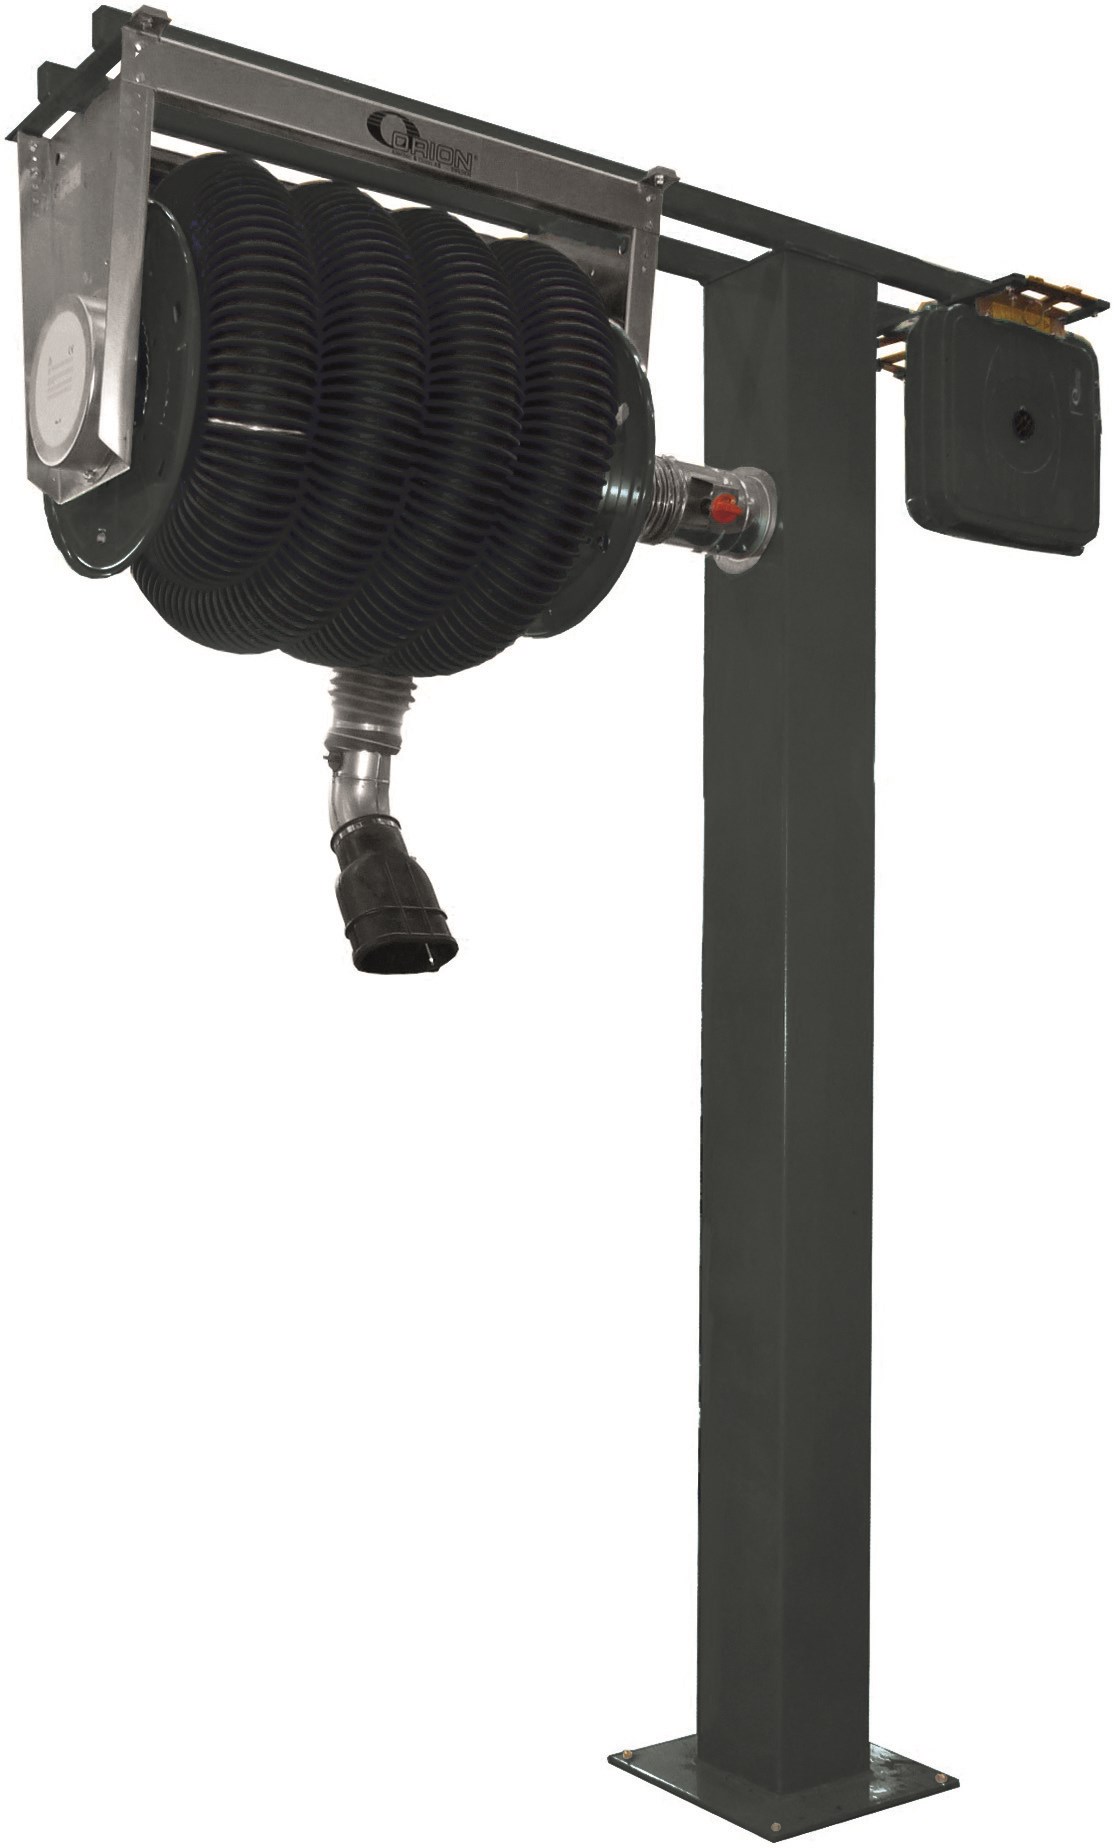 Service tower with hose reel mounting rack for 5 hose reels